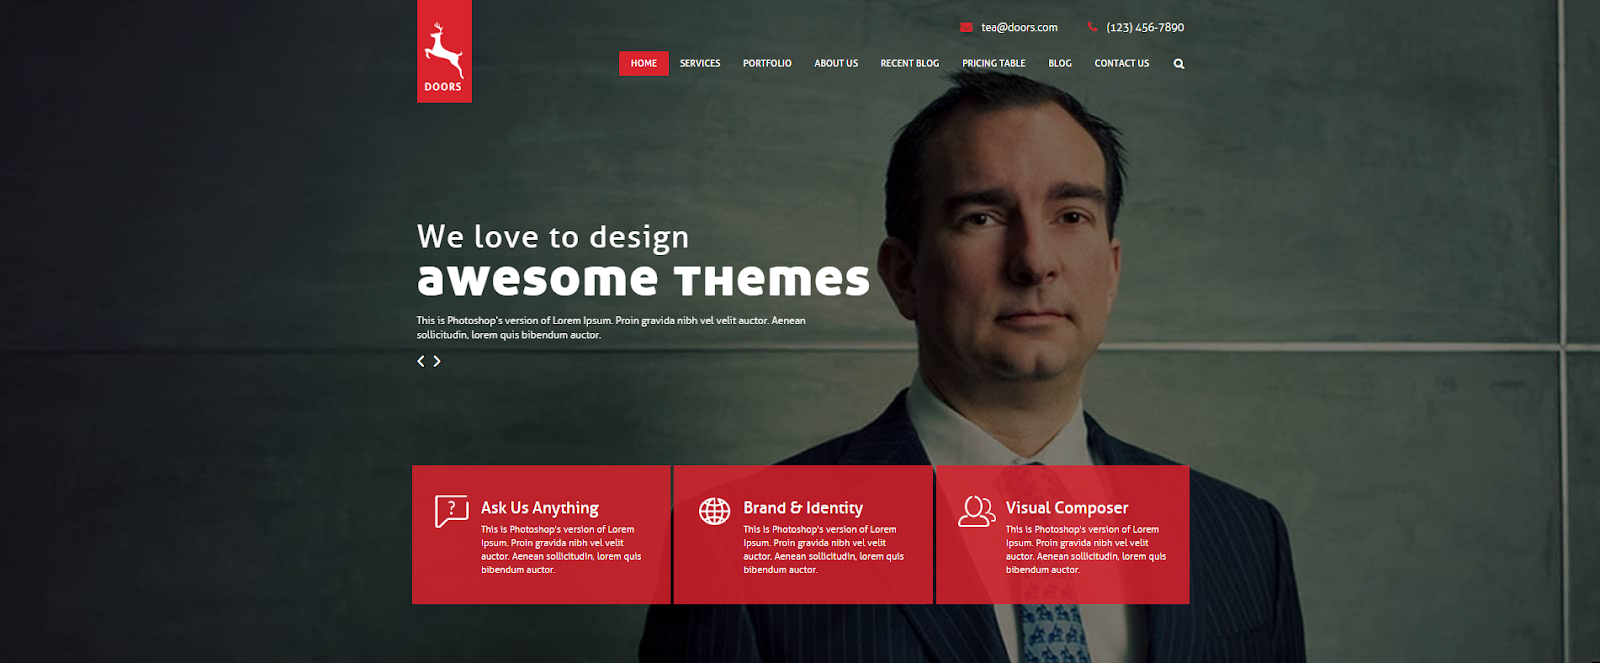 Doors - Responsive, Parallax, One Page WP Theme